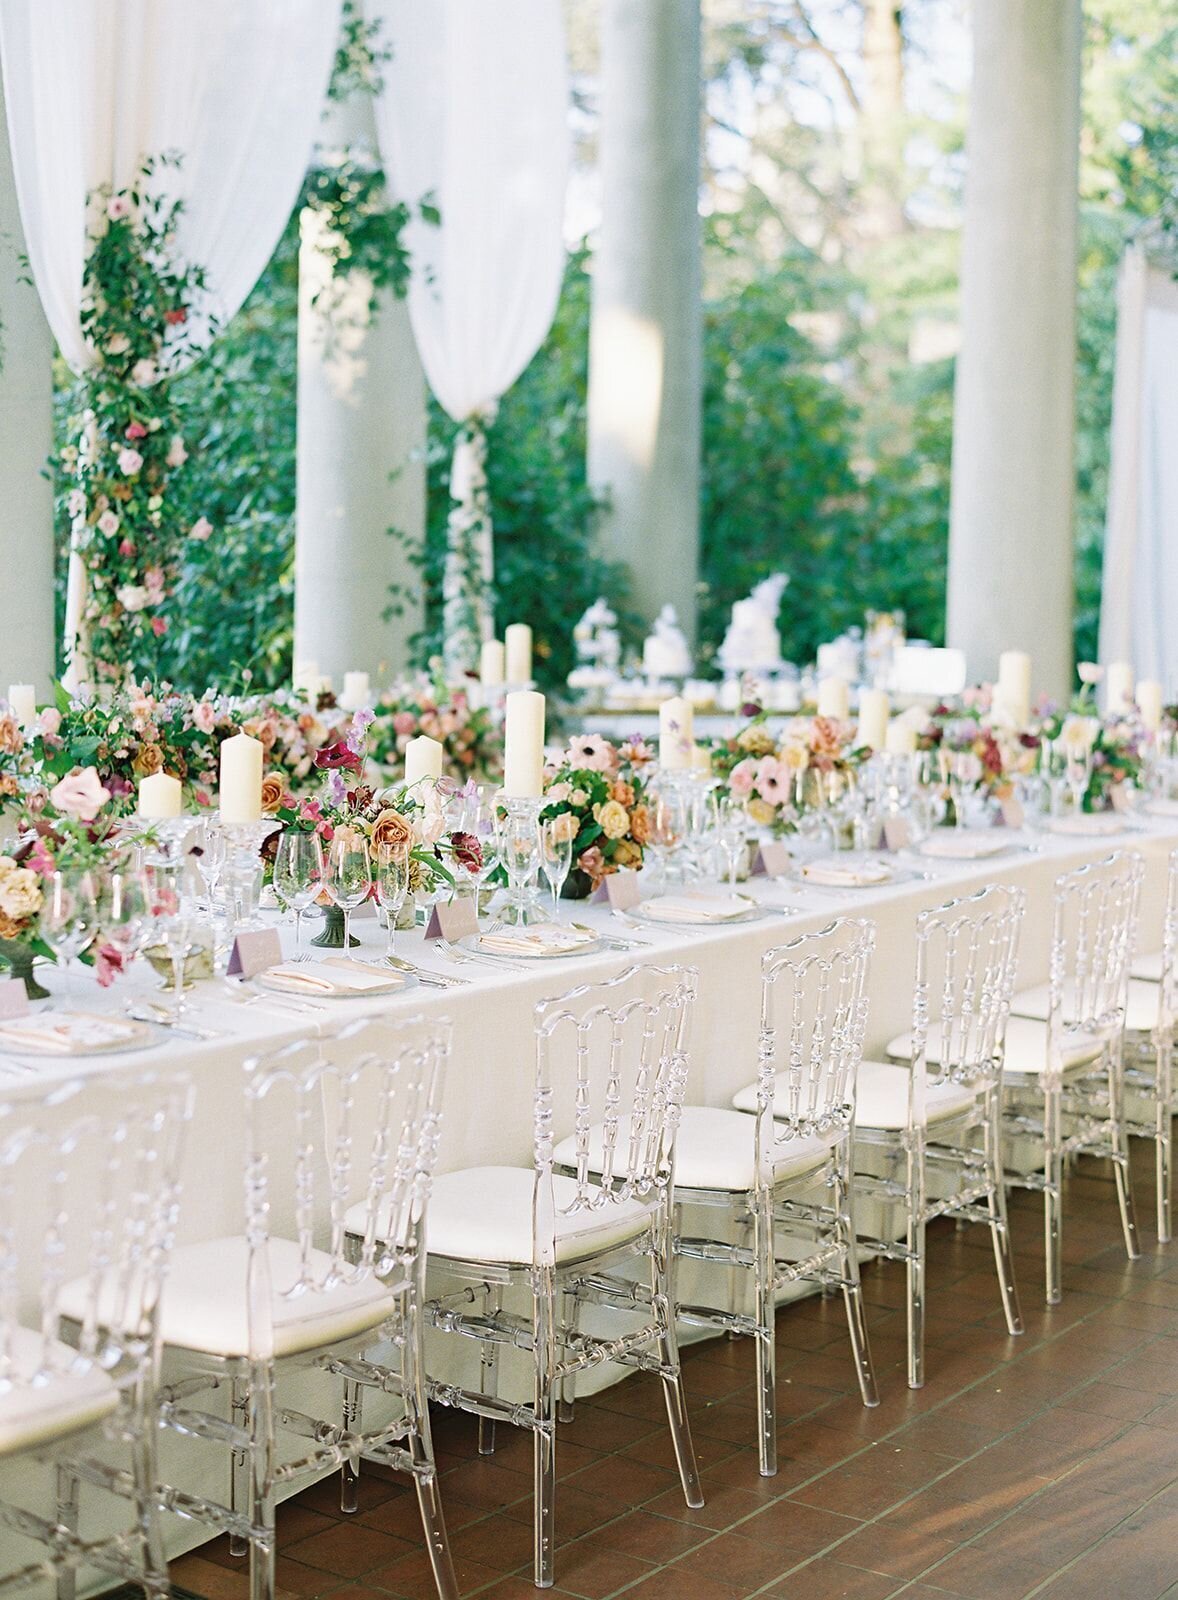 chairs and draping at reception